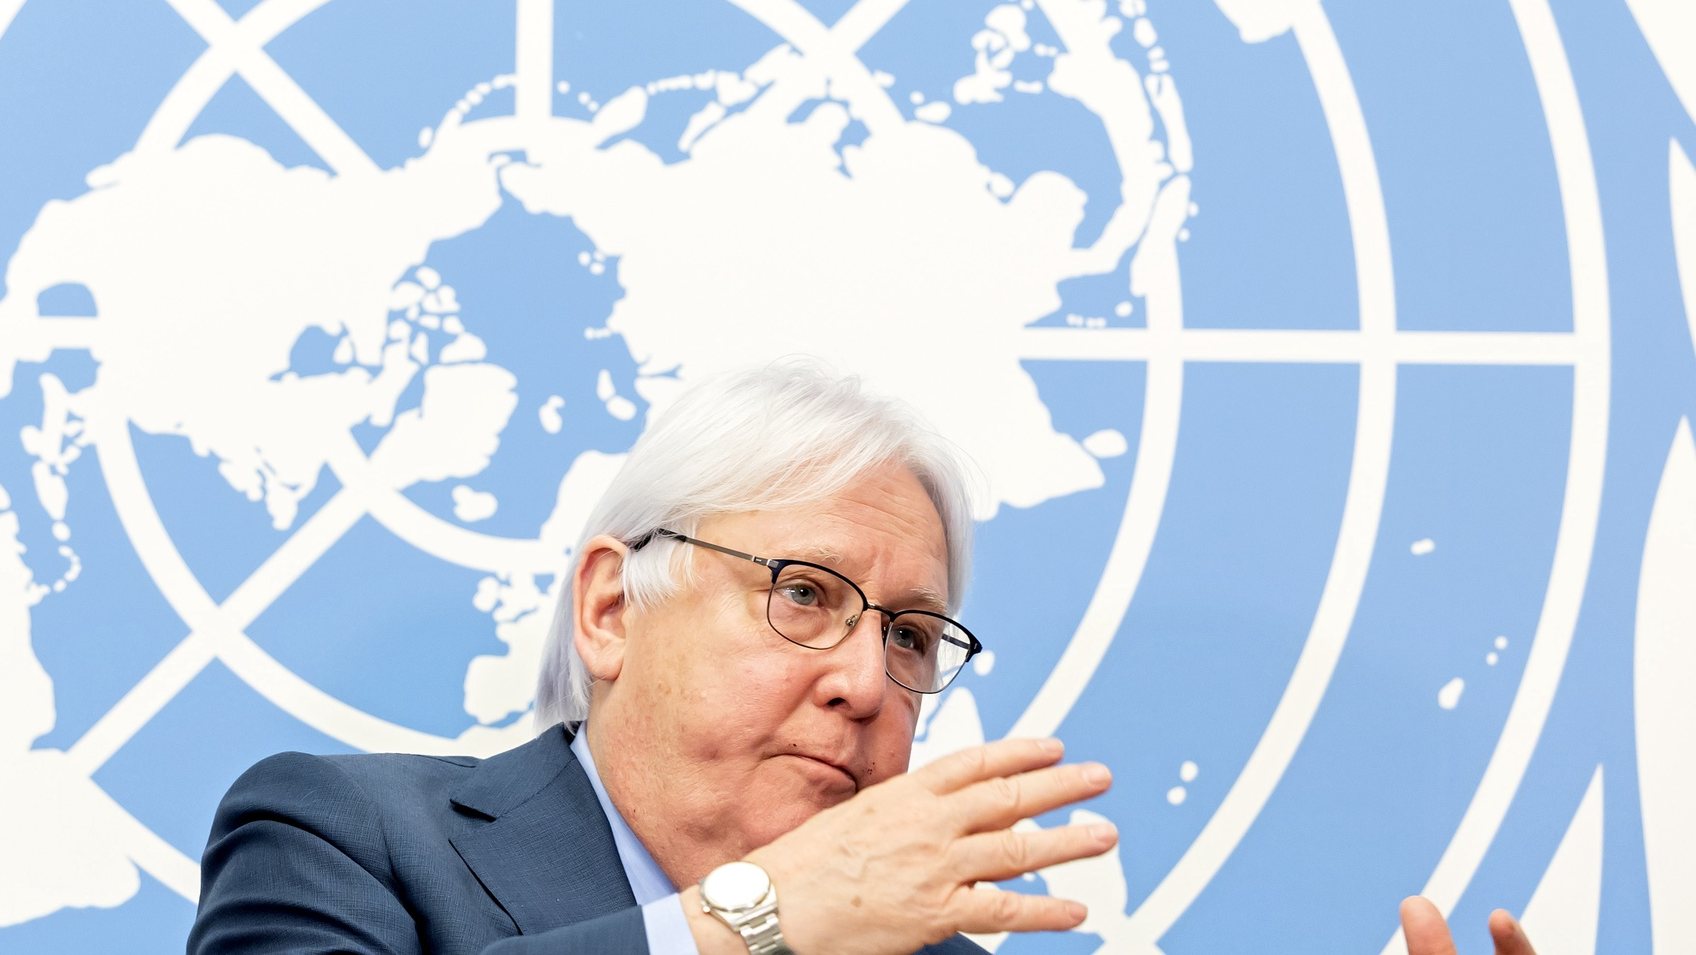 epa09793897 Martin Griffiths, Under-Secretary-General for Humanitarian Affairs and Emergency Relief Coordinator, launches of the humanitarian appeal in support of the people of Ukraine during a press conference, at the European headquarters of the United Nations in Geneva, Switzerland, 01 March 2022.  EPA/SALVATORE DI NOLFI